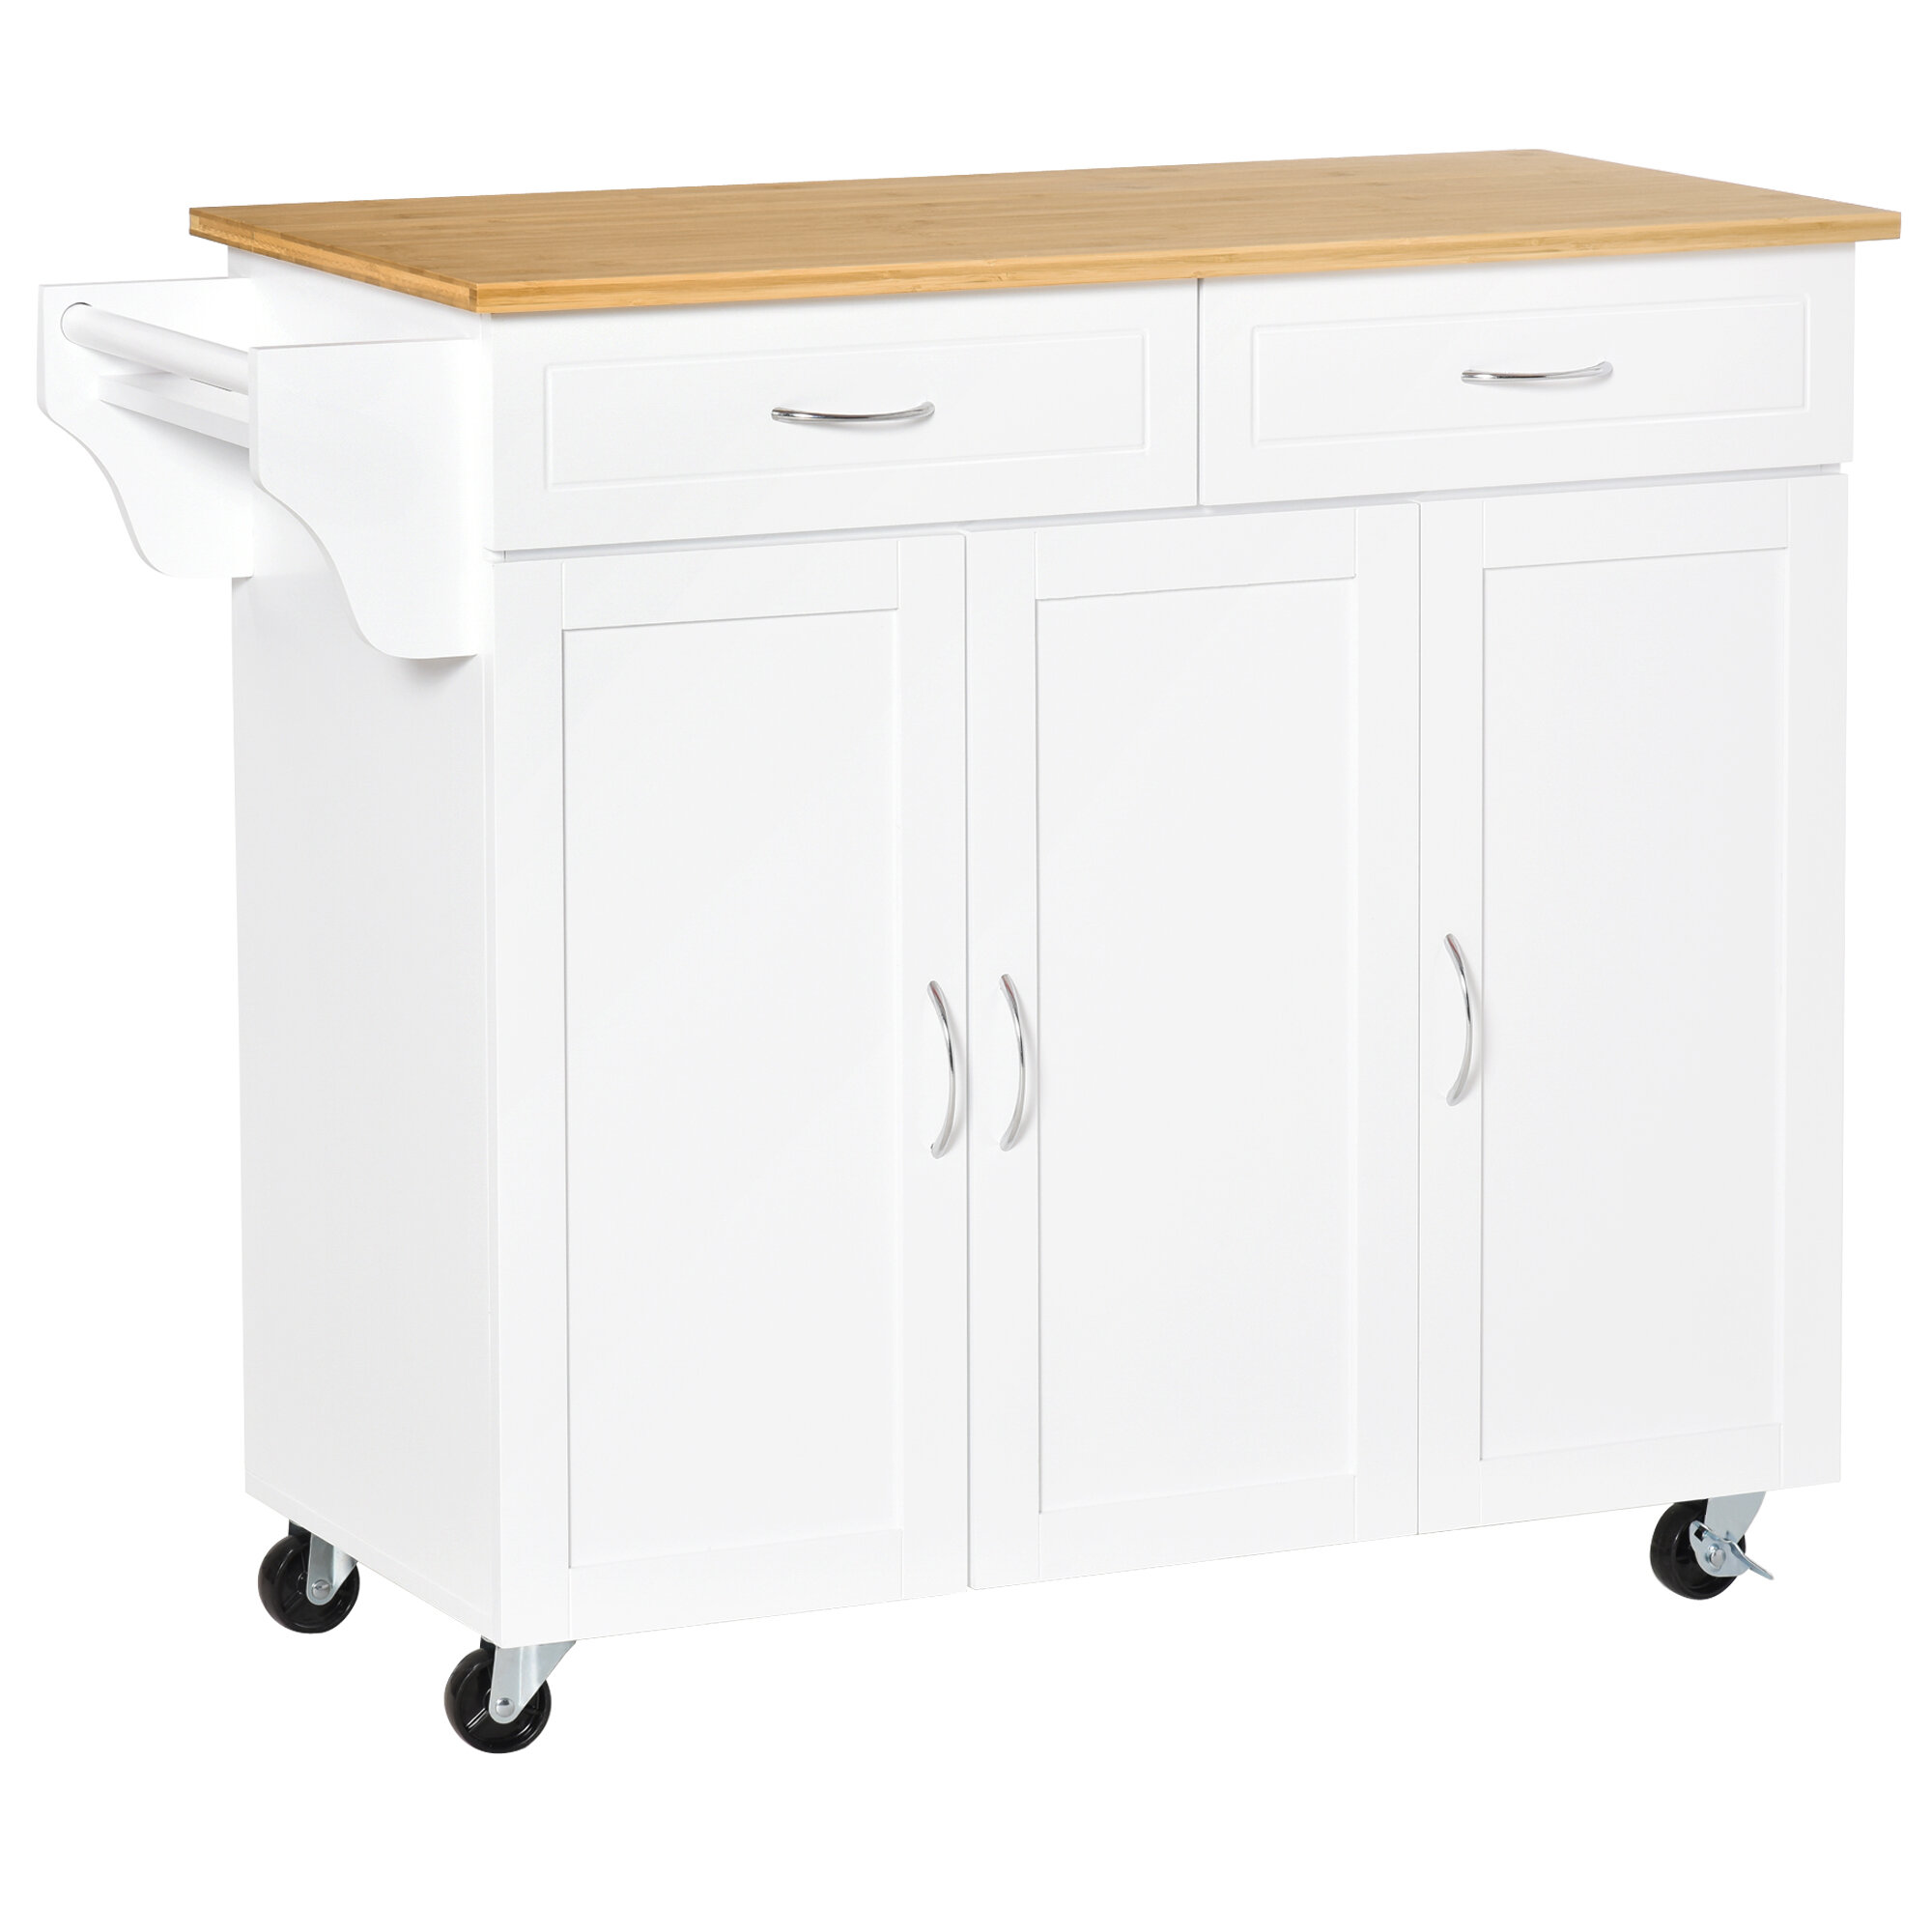 20'' Wide Rolling Kitchen Island with Solid Wood Top